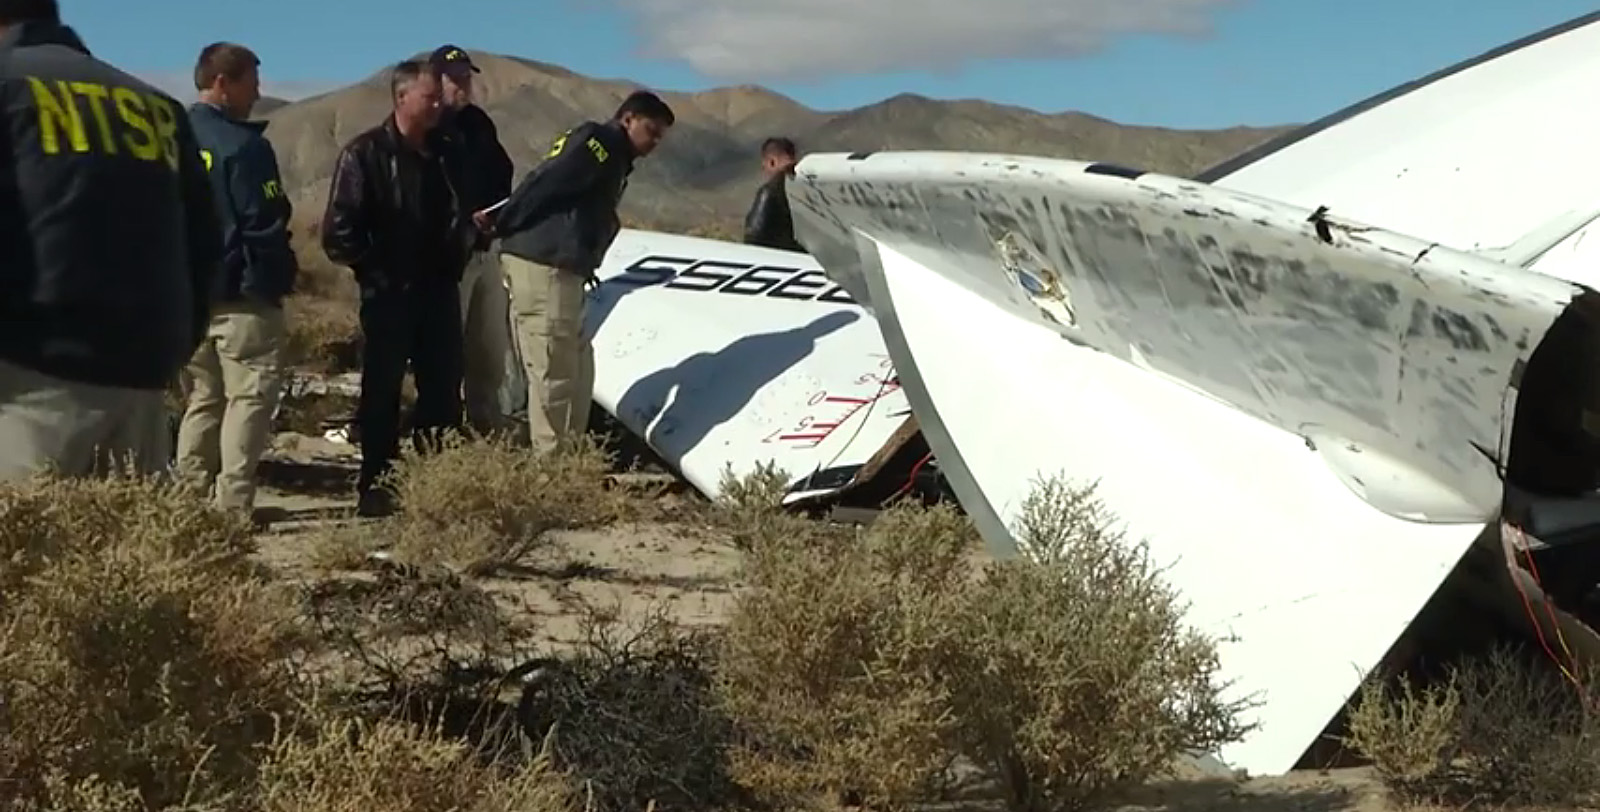 Investigators with the National Transportation Safety Board (NTSB) looking over wreckage from the crash of Virgin Galactic's Spaceship Two, which killed co-pilot Michael Alsbury and injured co-pilot Peter Siebold, who managed to parachute to the ground. Photo Credit: NTSB